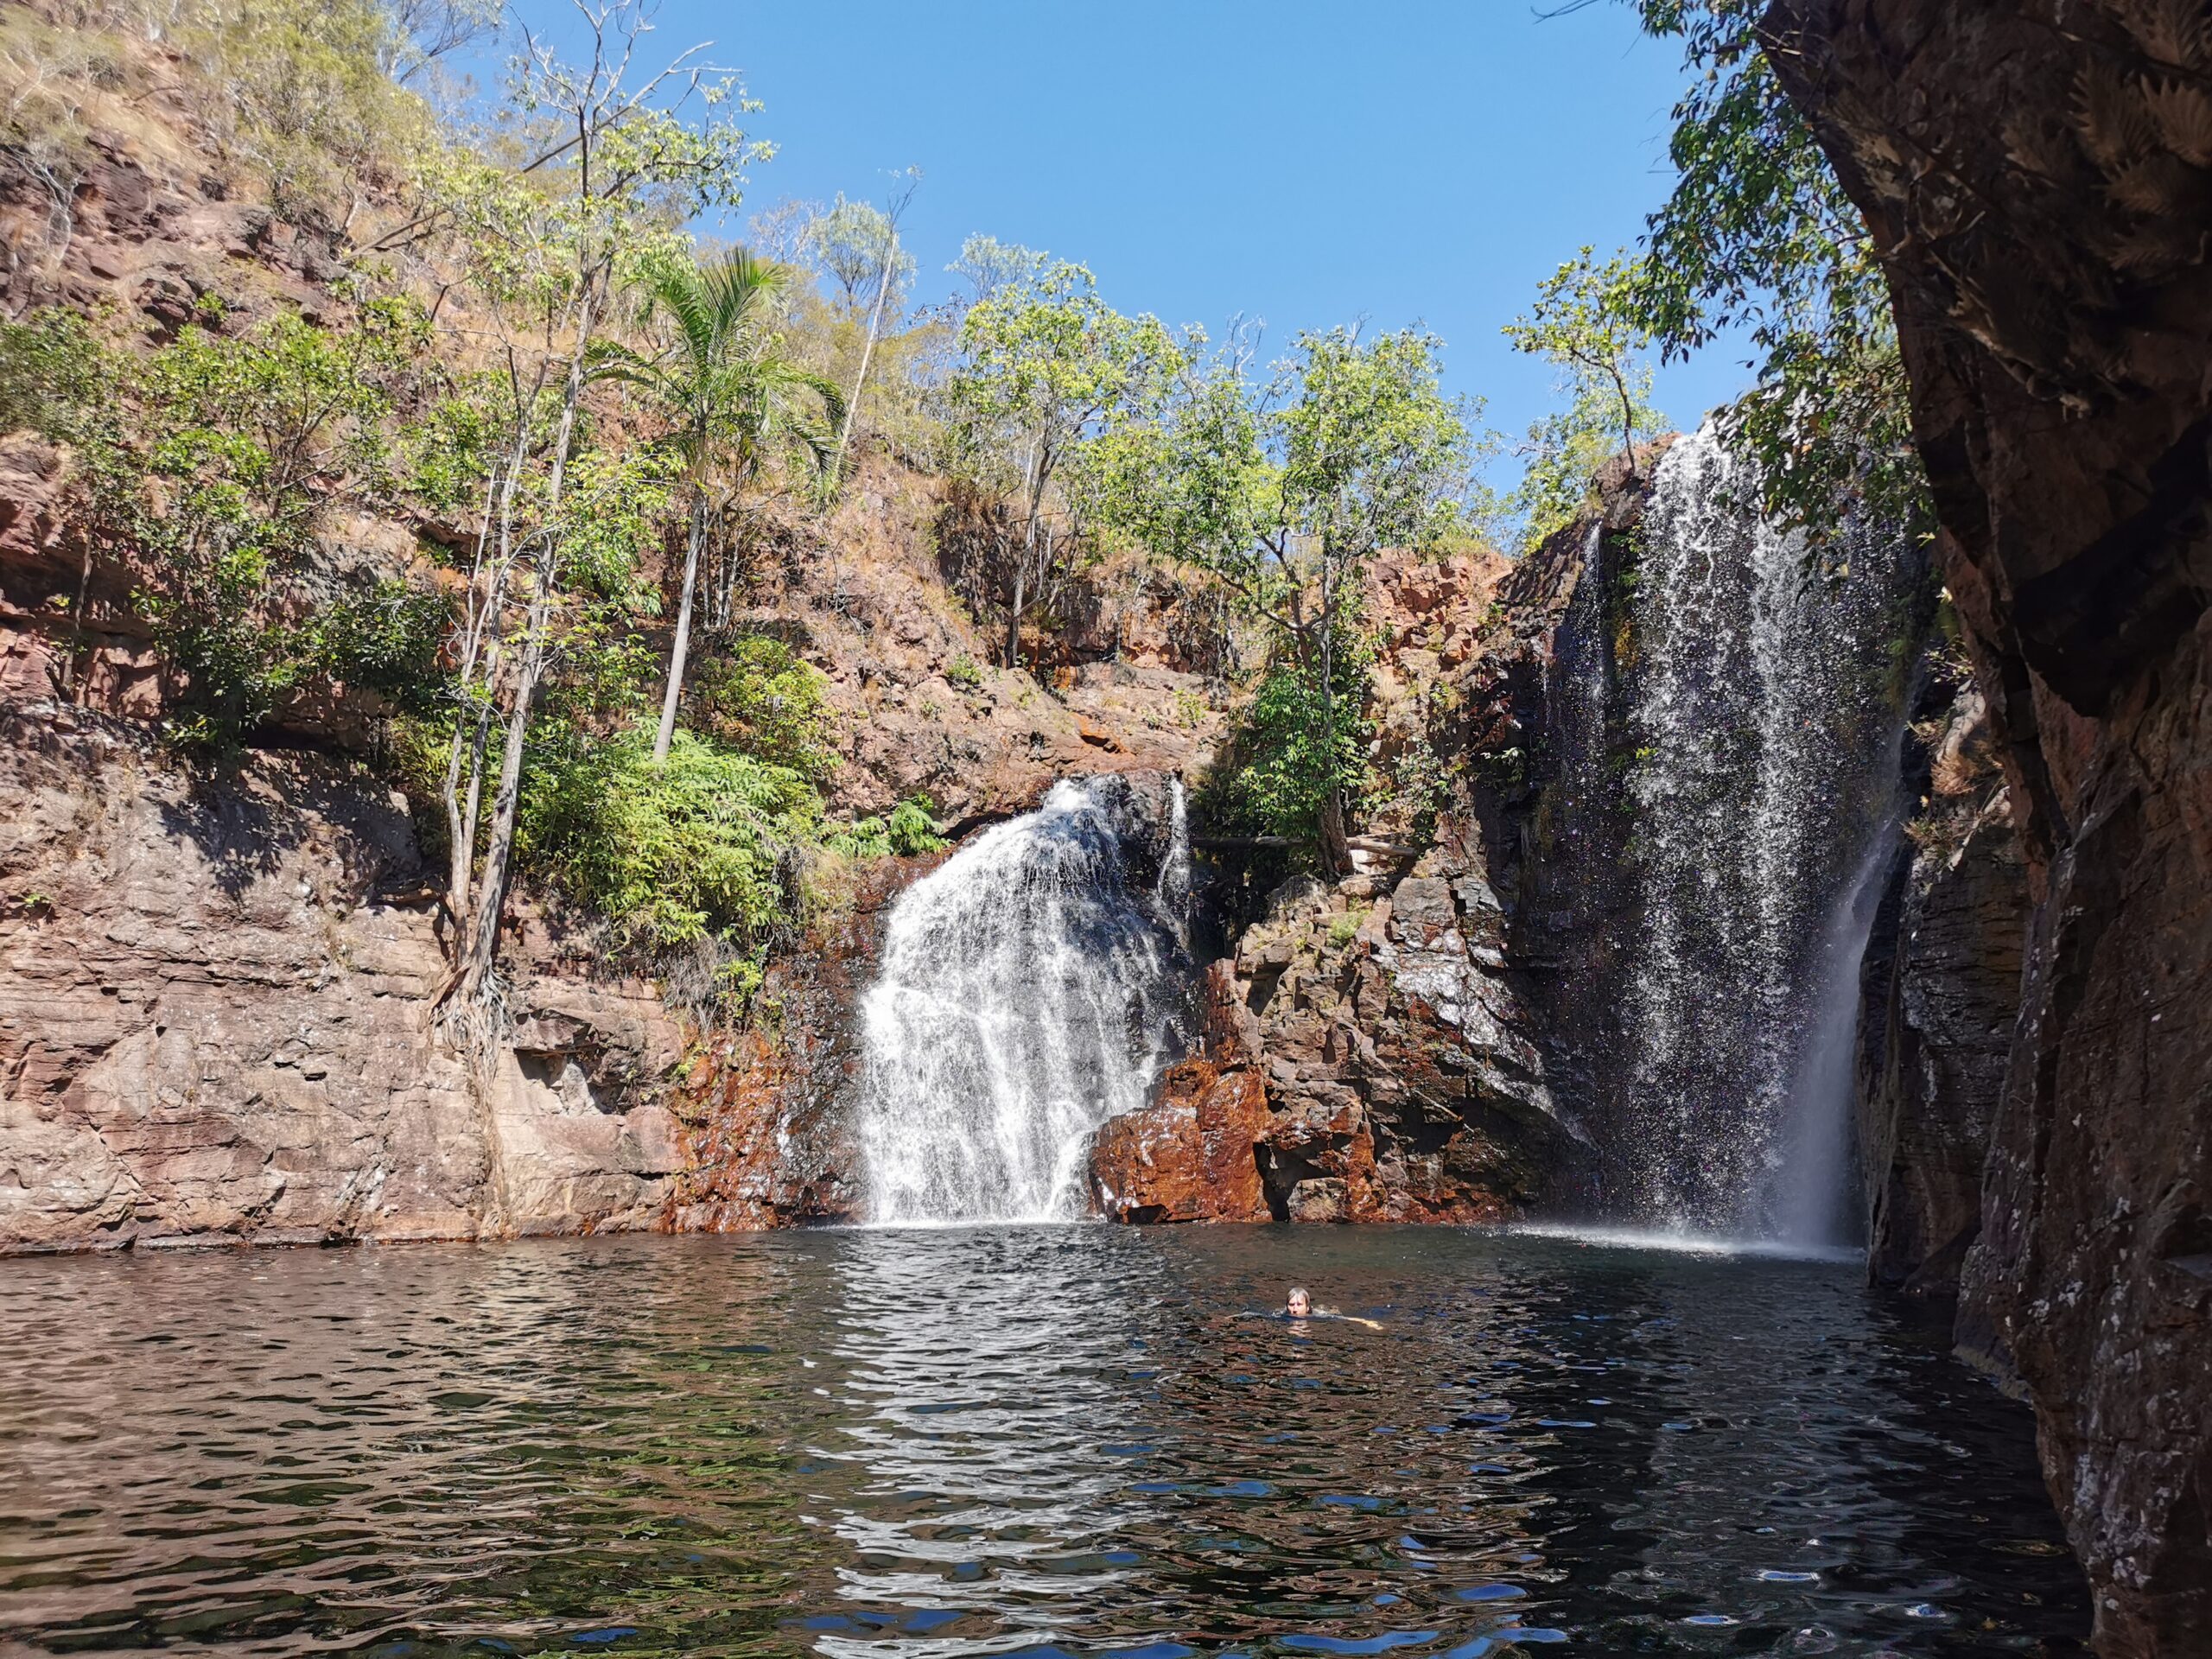 Litchfield National Park Tour & Berry Springs, Minivan, max 10 Guests, 1 Day from Darwin